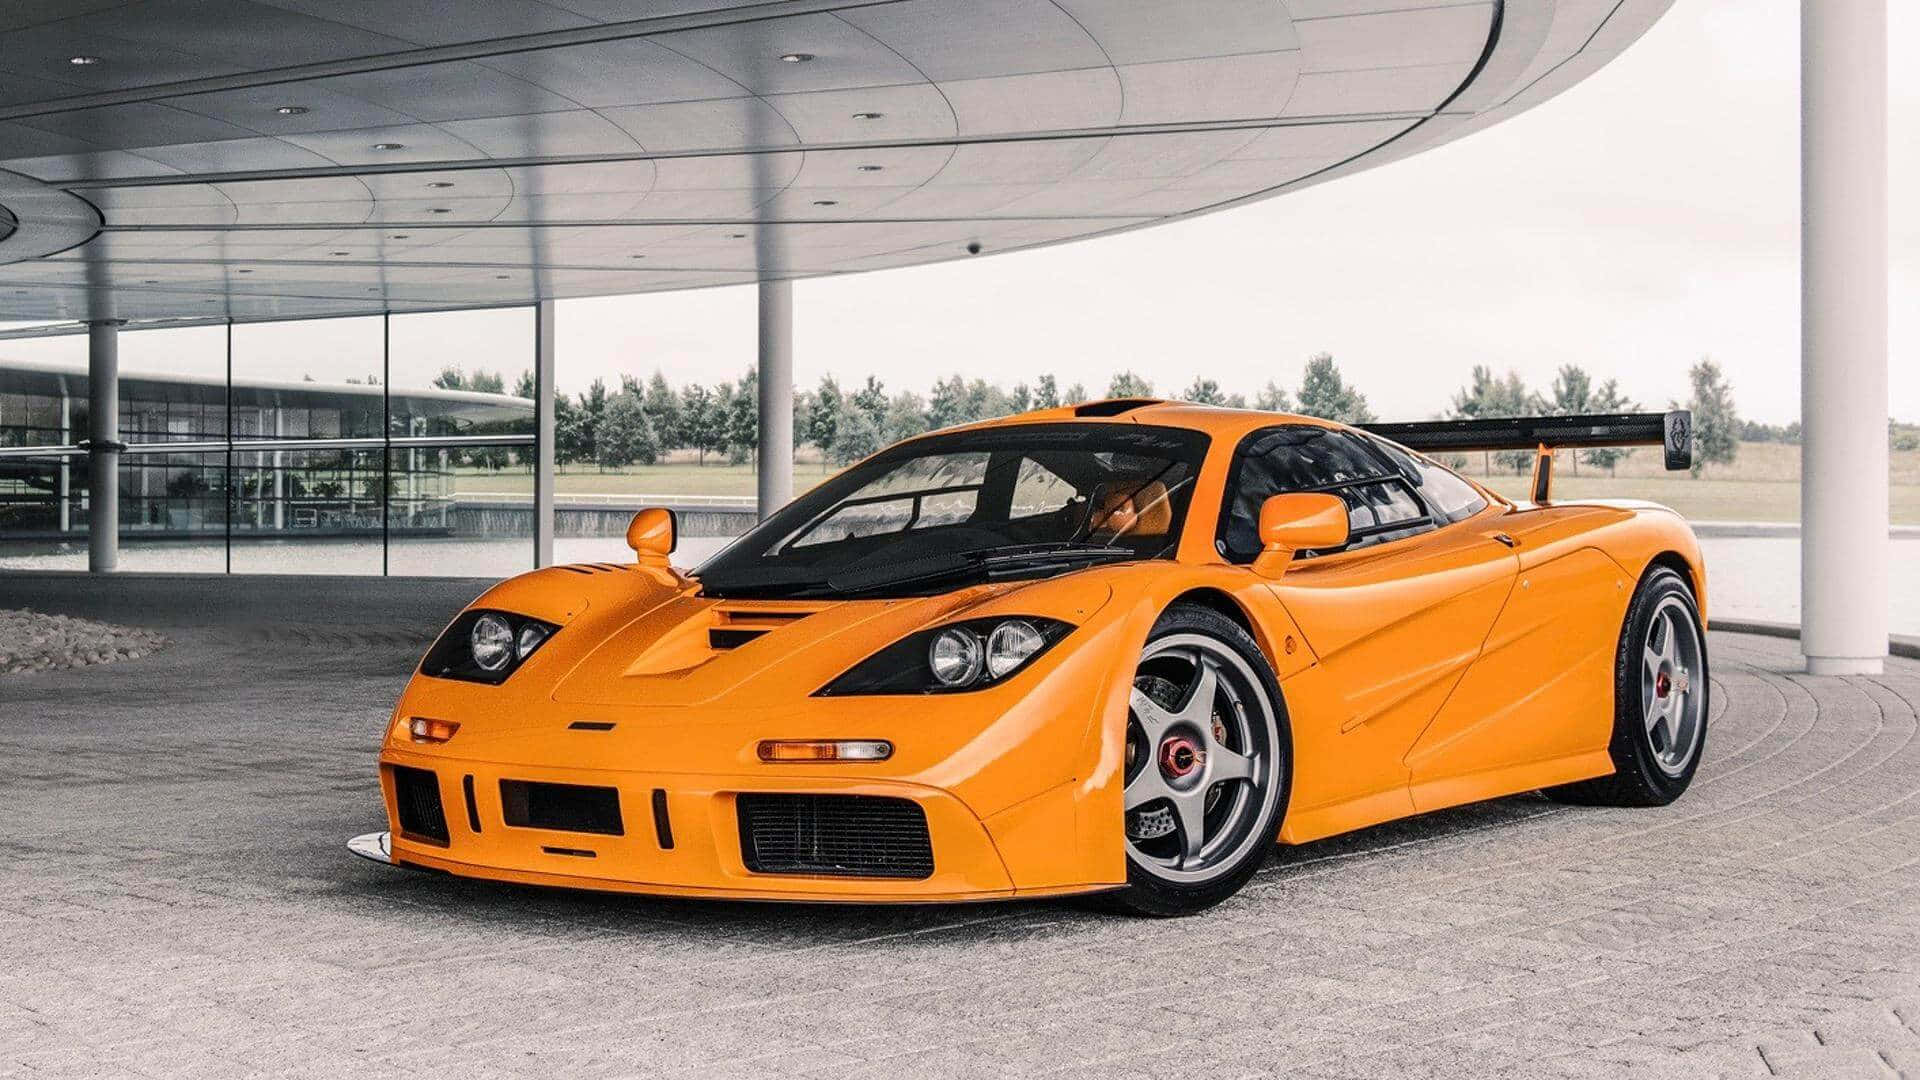 Speed and Luxury - The Mighty McLaren F1 Wallpaper